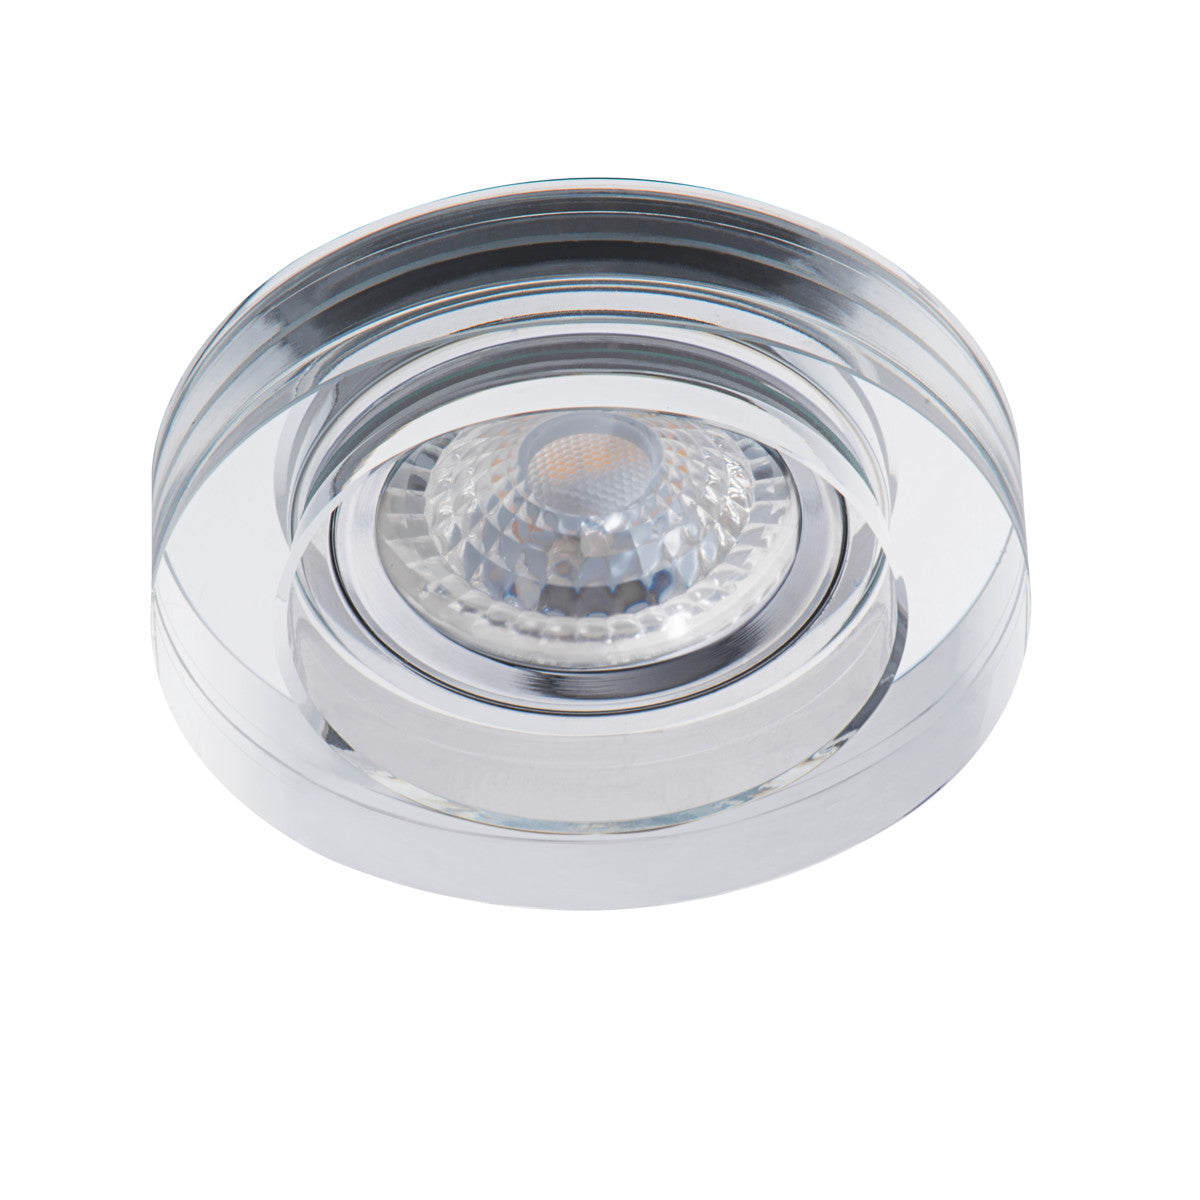 Kanlux MORTA Ceiling Recessed Mounted Round Square GU10 Spot Light Fitting